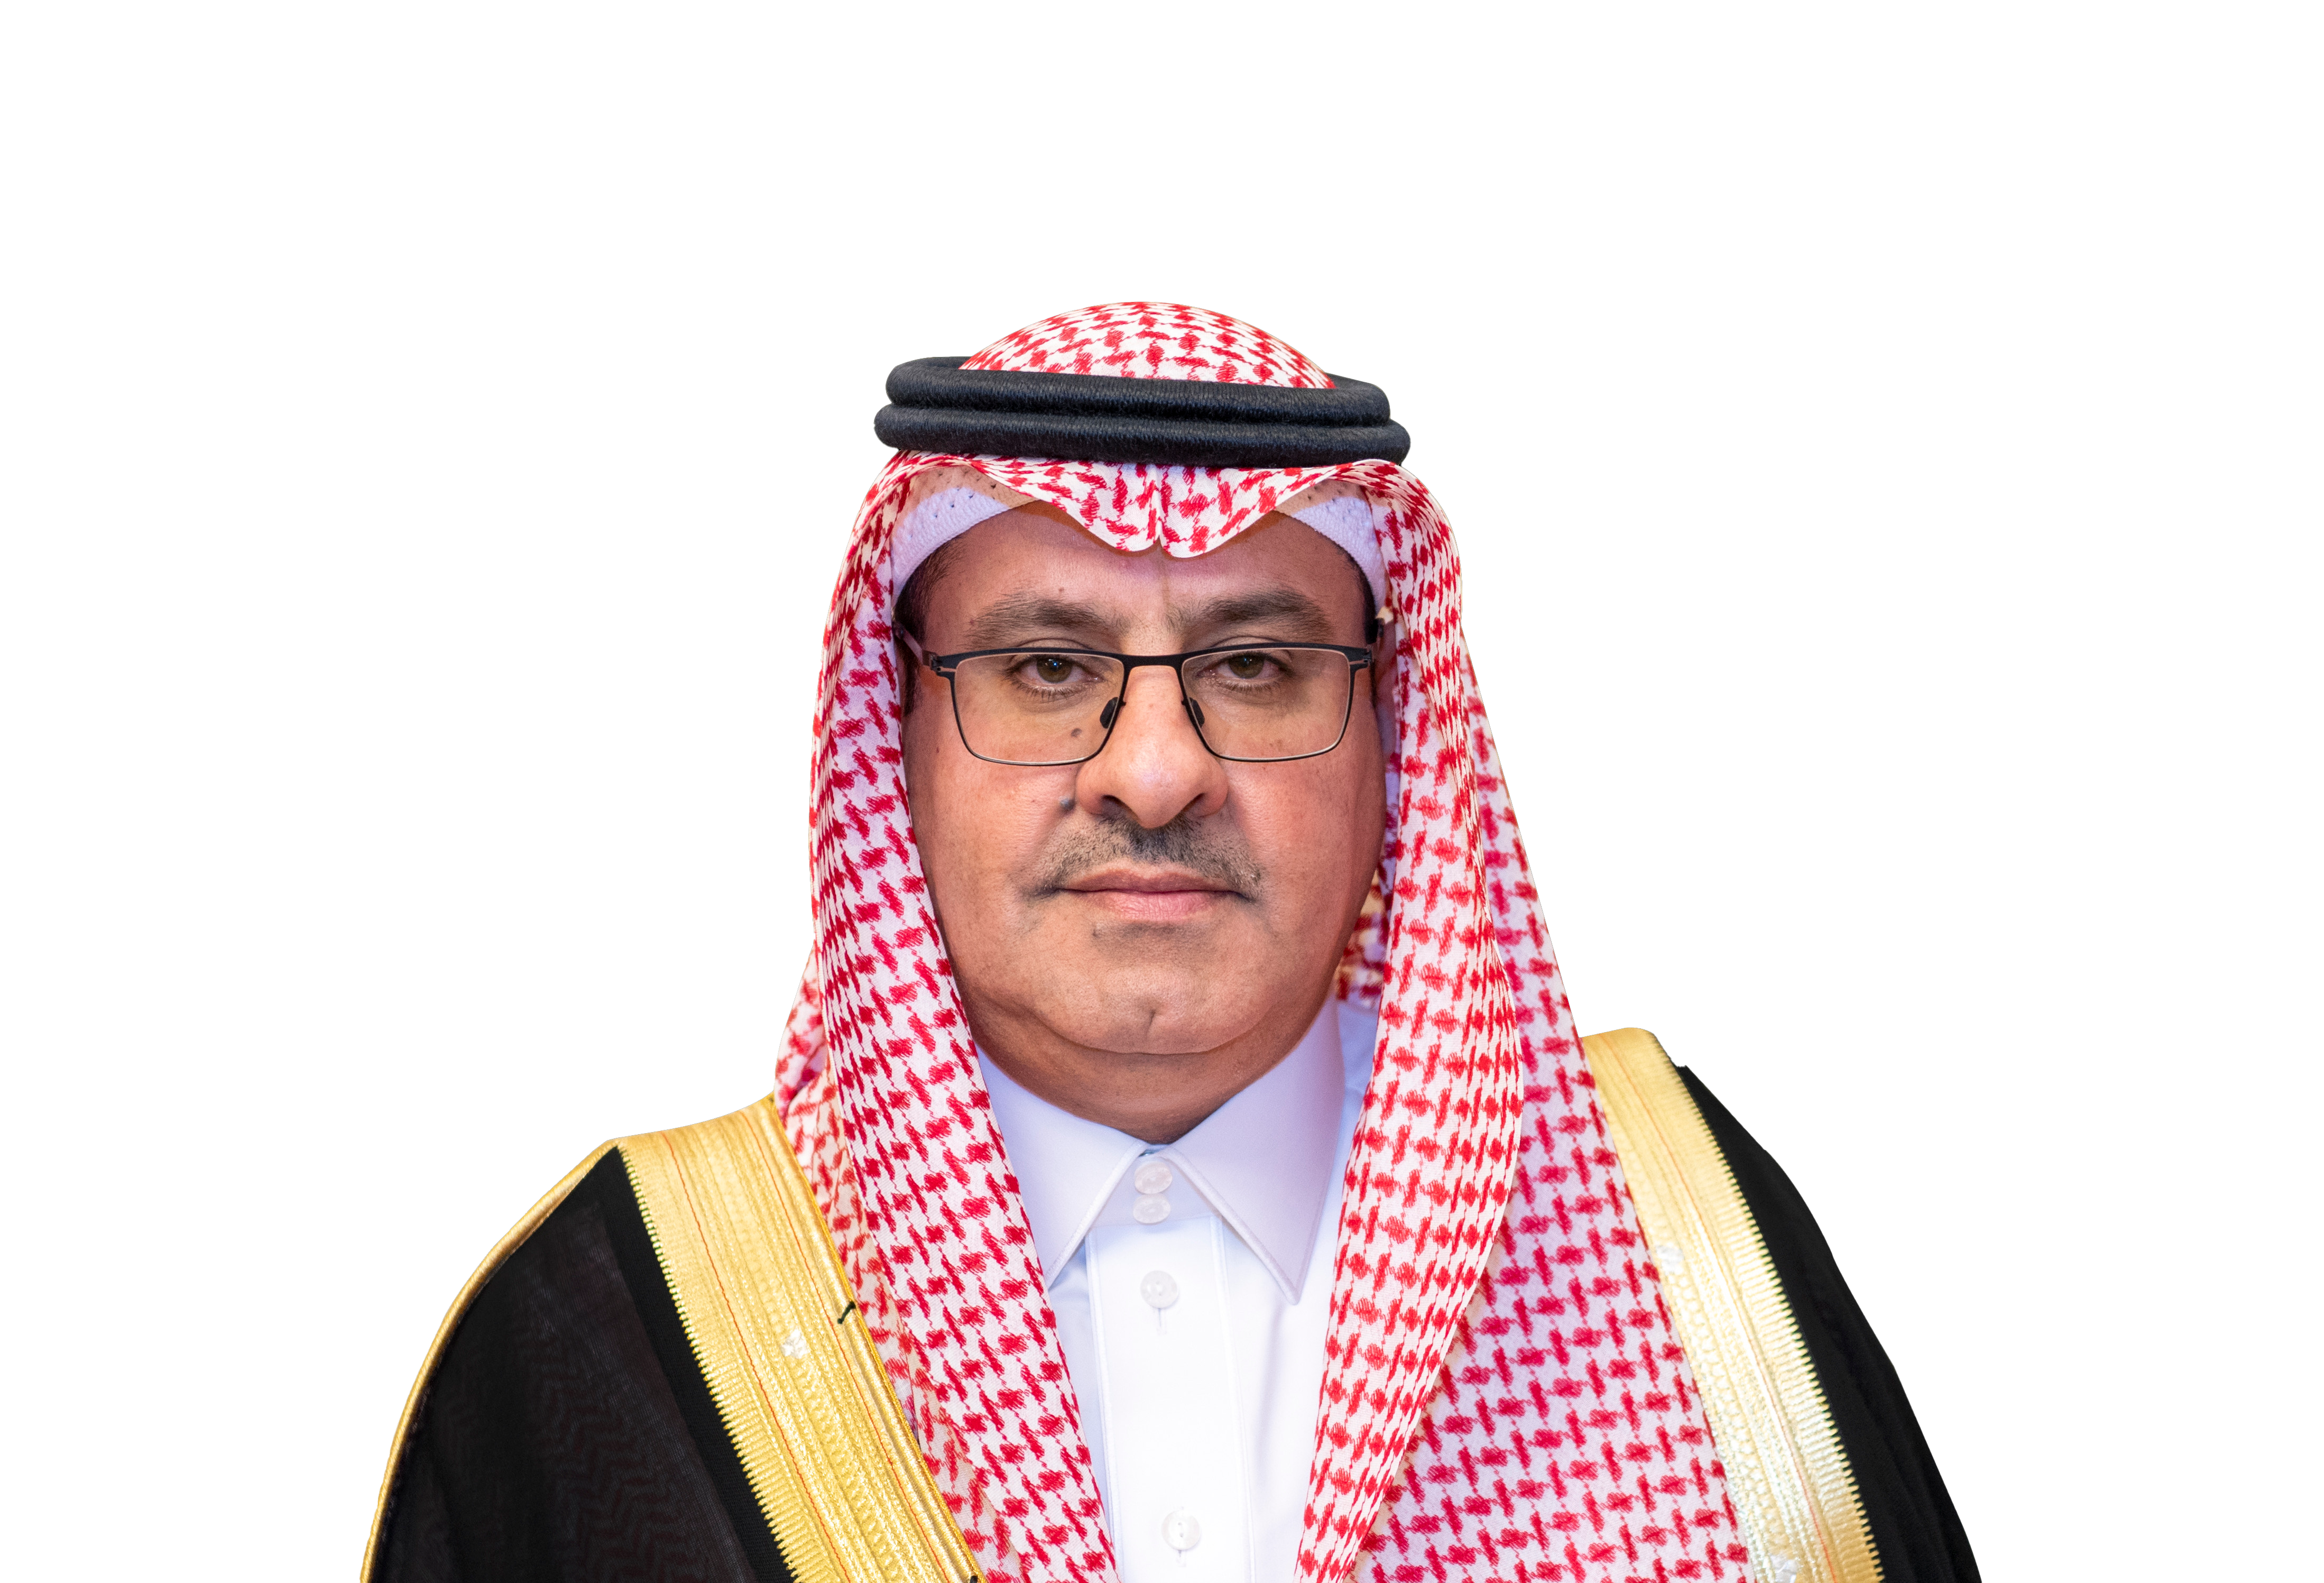 His Excellency Dr. Hisham Al-Sheikh Extends his Gratitude to the Kingdom’s Leadership Following his Appointment as Vice President of the Human Rights Commission